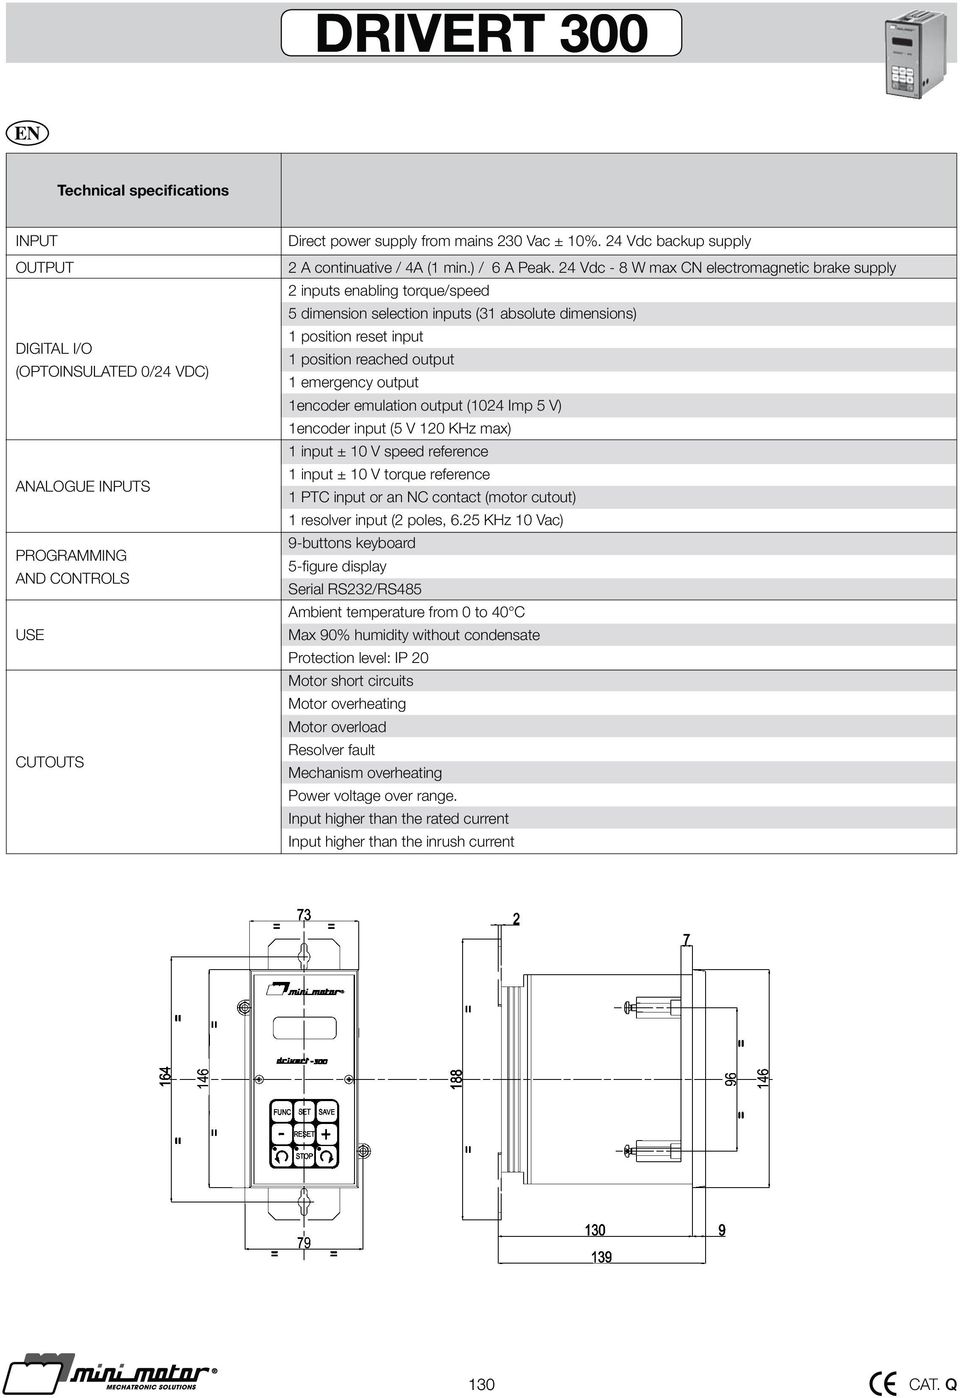 24 Vdc - 8 W max CN electromagnetic brake supply 2 inputs enabling torque/speed 5 dimension selection inputs (31 absolute dimensions) 1 position reset input 1 position reached output 1 emergency